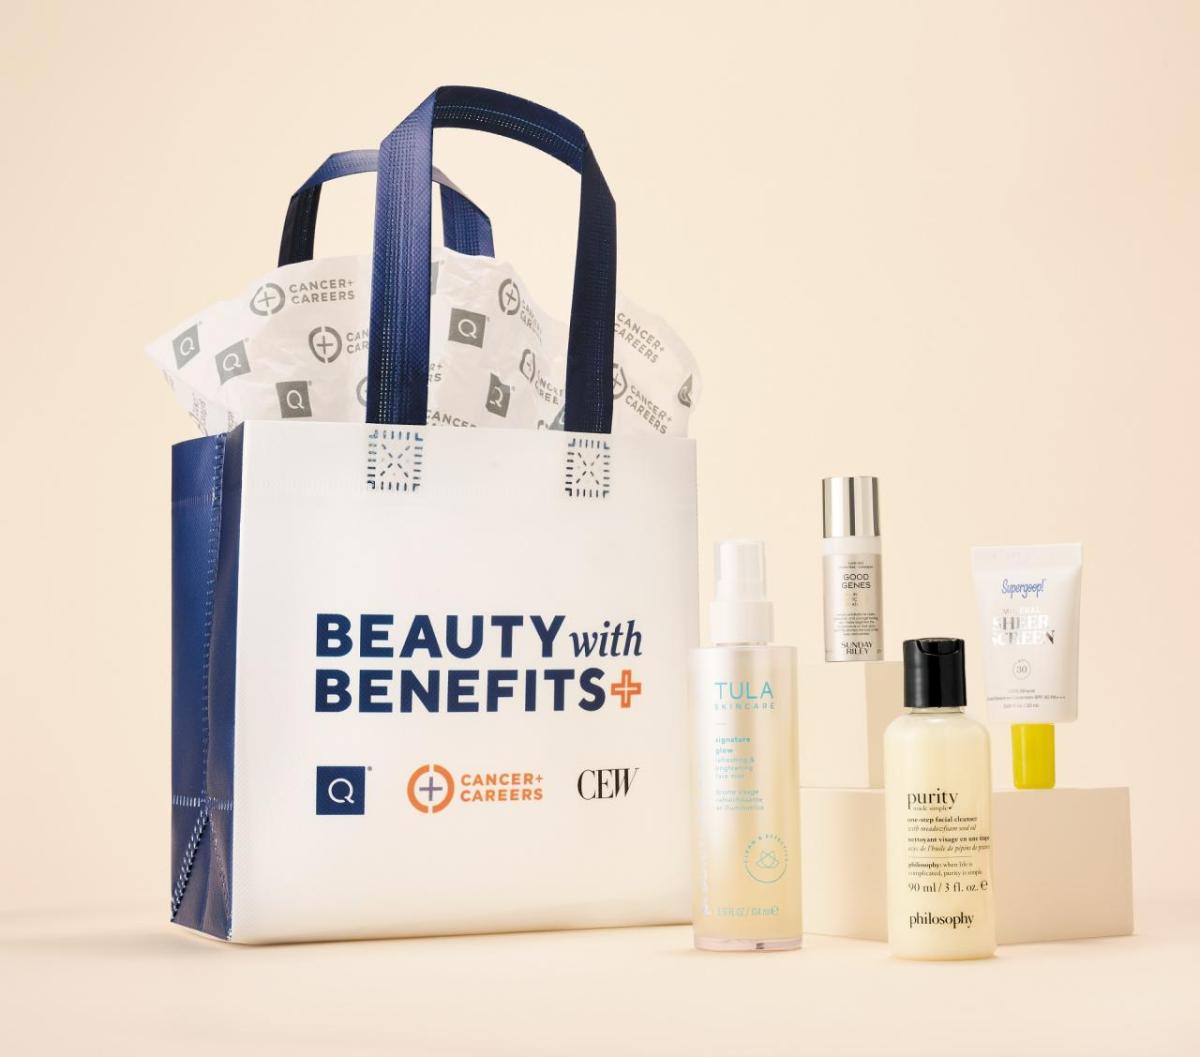 The Beauty with Benefits Gift with Purchase bag is pictured, along with four products from TULA, Sunday Riley, Supergoop! and philosophy. 